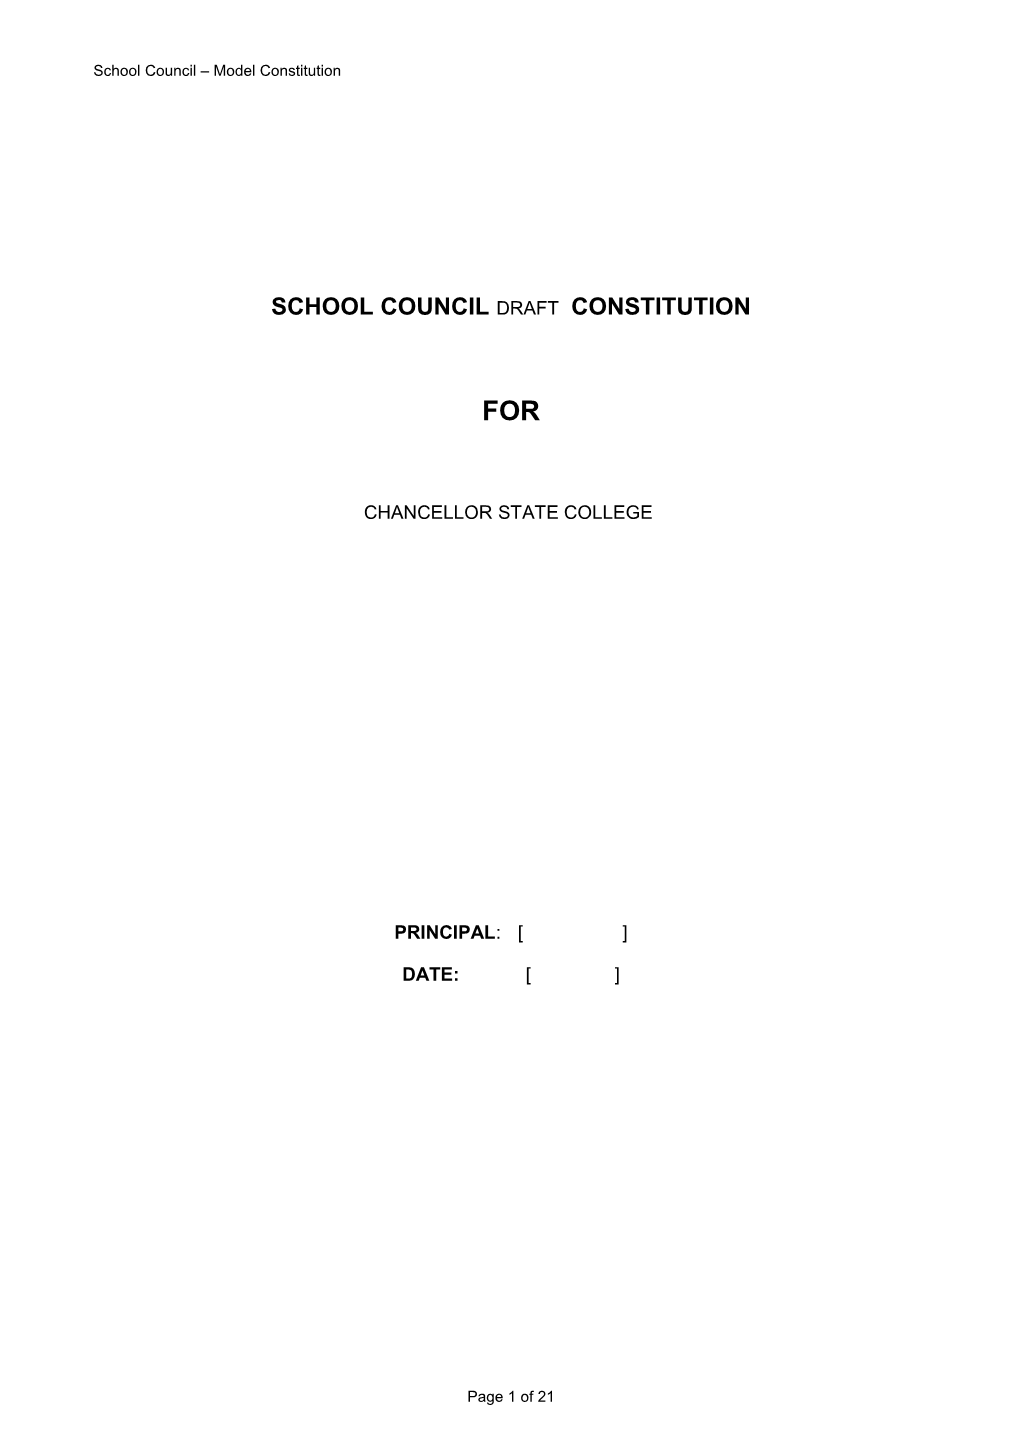 School Council Draft Constitution